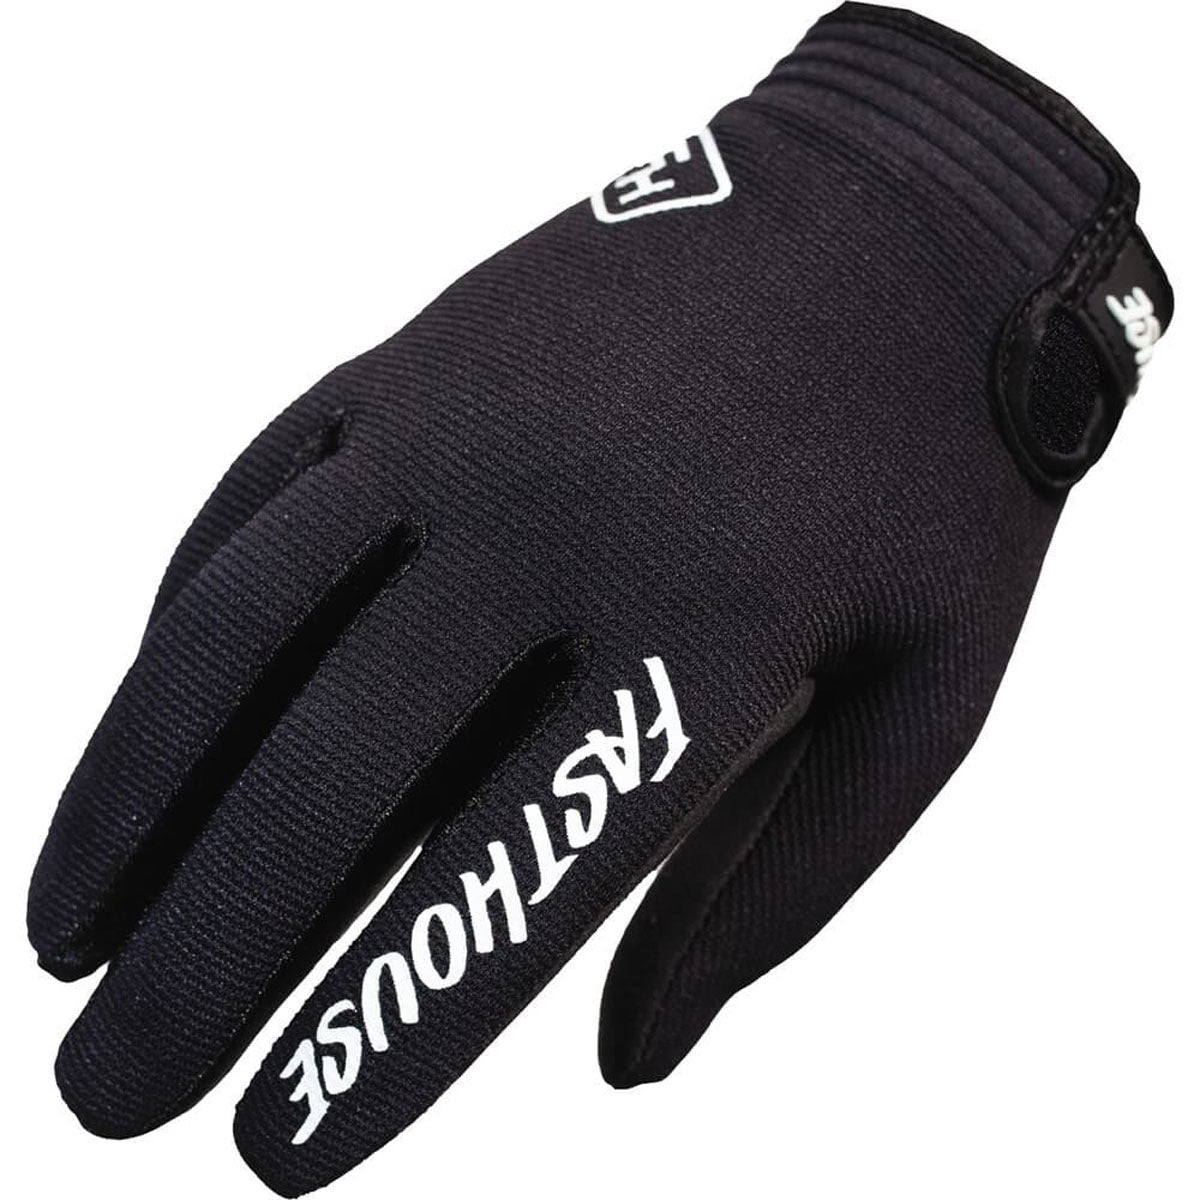 Fasthouse Youth Carbon Glove - ExtremeSupply.com